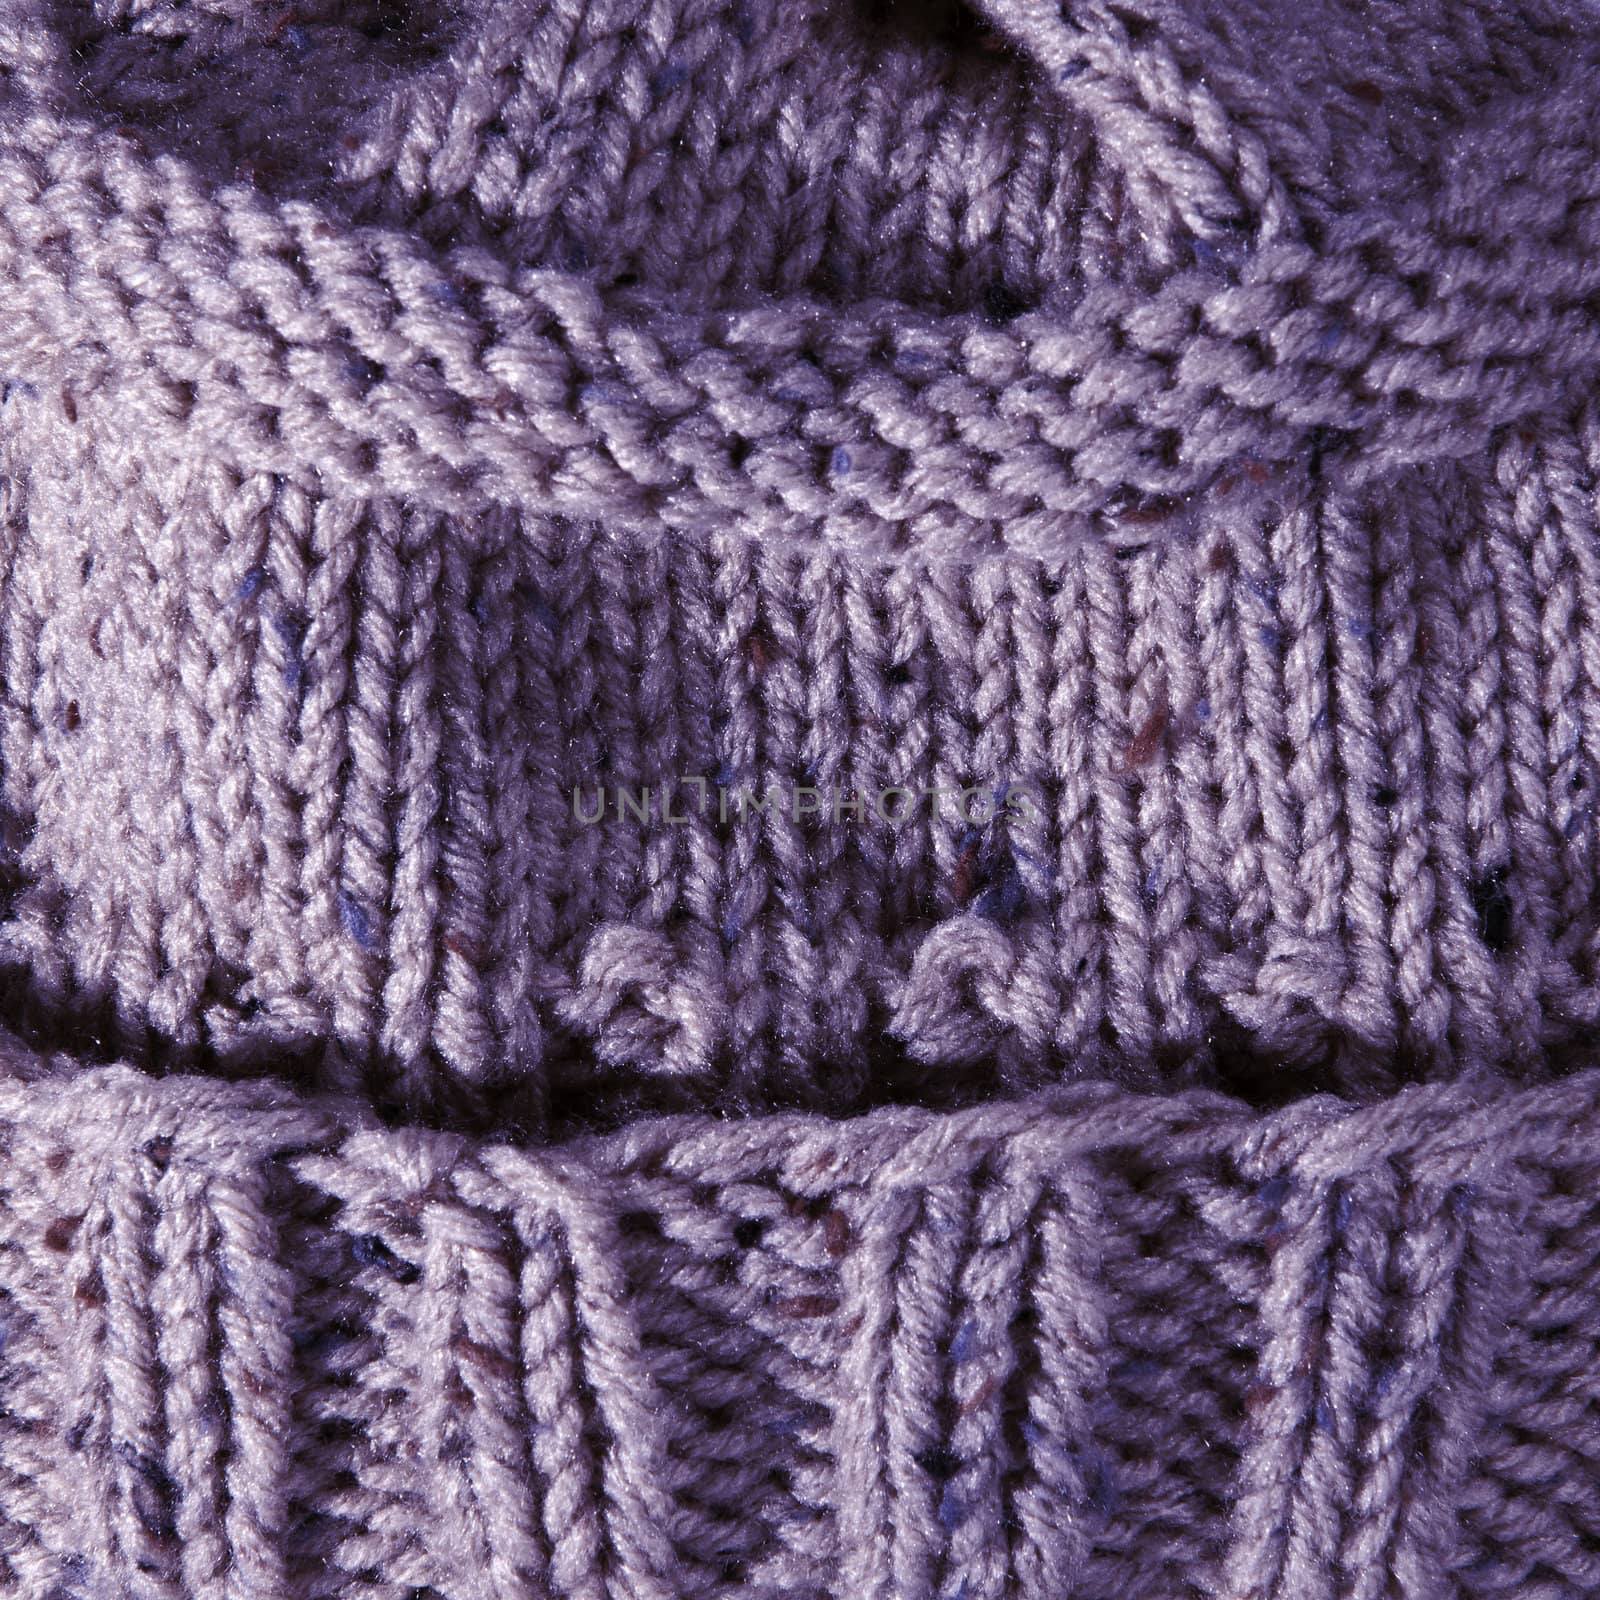 Purple Handmade Knit Texture by mary981